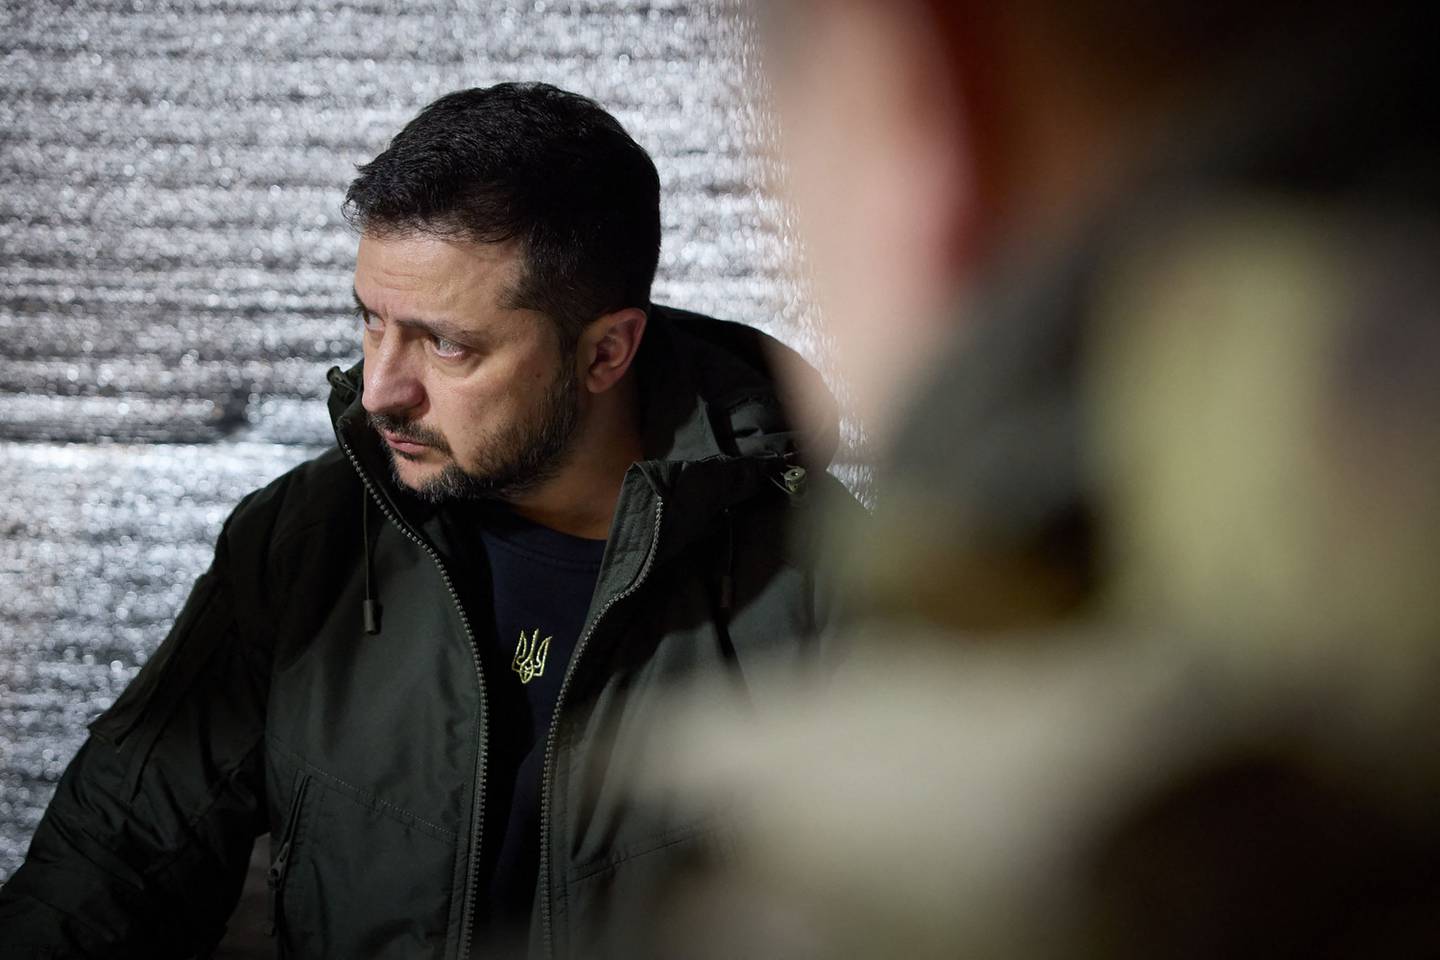 This handout photograph taken and released by Ukrainian Presidential Press Service on December 29, 2023, shows Ukrainian President Volodymyr Zelensky during a visit of the advanced checkpoint of the 110th Separate Mechanized Brigade named after late Ukrainian General-Corporal Marko Bezruchko in the town of Avdiivka, Donetsk region, amid the Russian invasion of Ukraine. (Photo by Handout / UKRAINIAN PRESIDENTIAL PRESS SERVICE / AFP) / RESTRICTED TO EDITORIAL USE - MANDATORY CREDIT "AFP PHOTO / UKRAINIAN PRESIDENTIAL PRESS SERVICE " - NO MARKETING NO ADVERTISING CAMPAIGNS - DISTRIBUTED AS A SERVICE TO CLIENTS